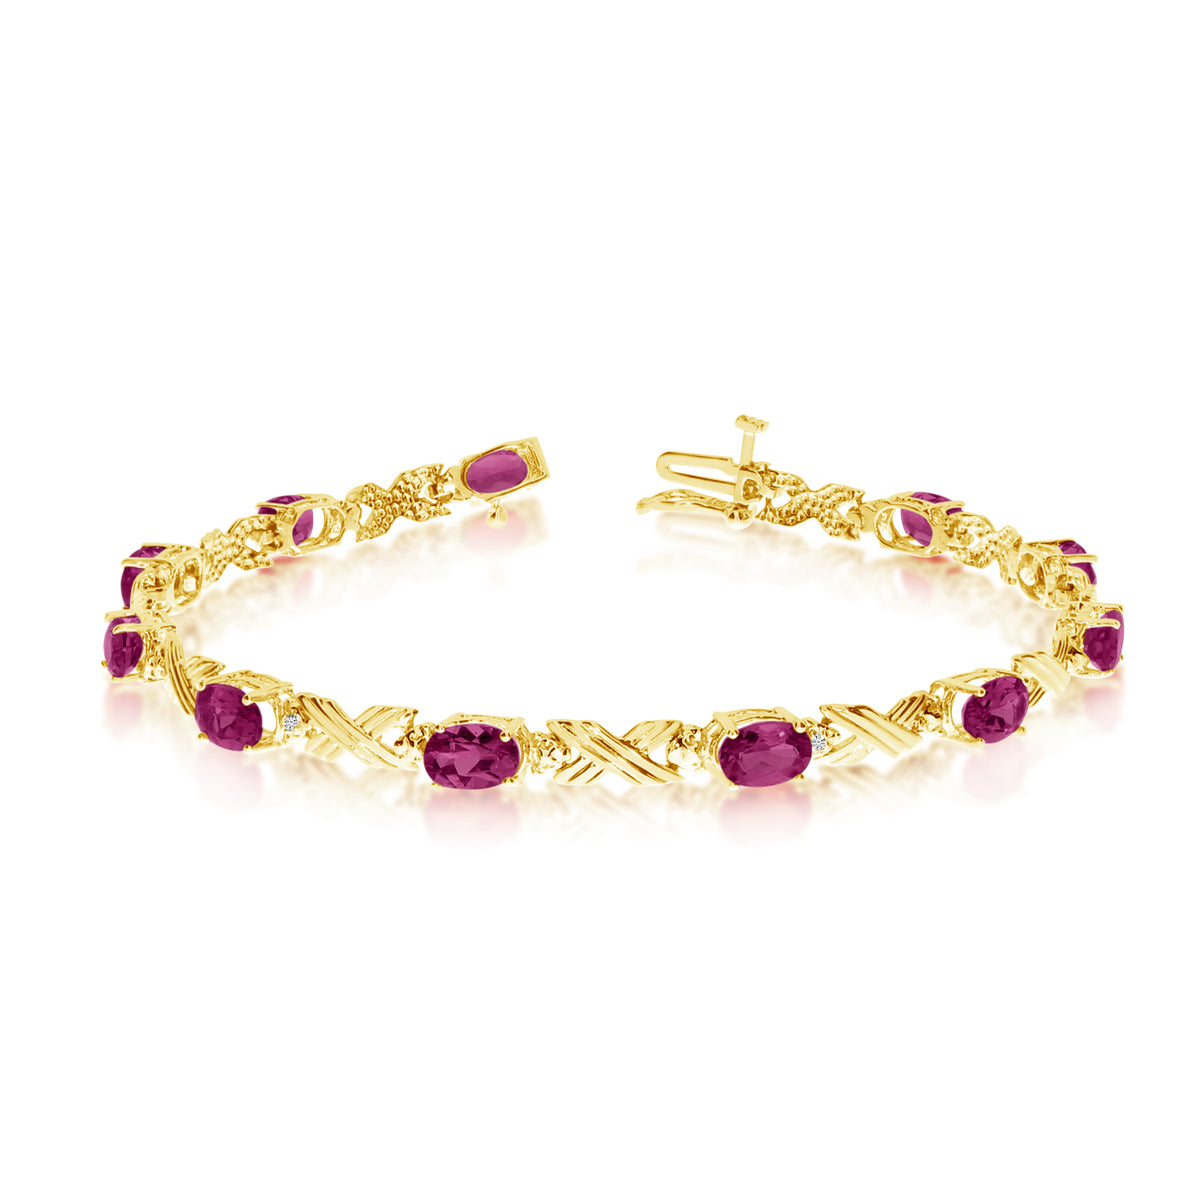 14K Yellow Gold Oval Ruby Stones And Diamonds Tennis Bracelet, 7" fine designer jewelry for men and women